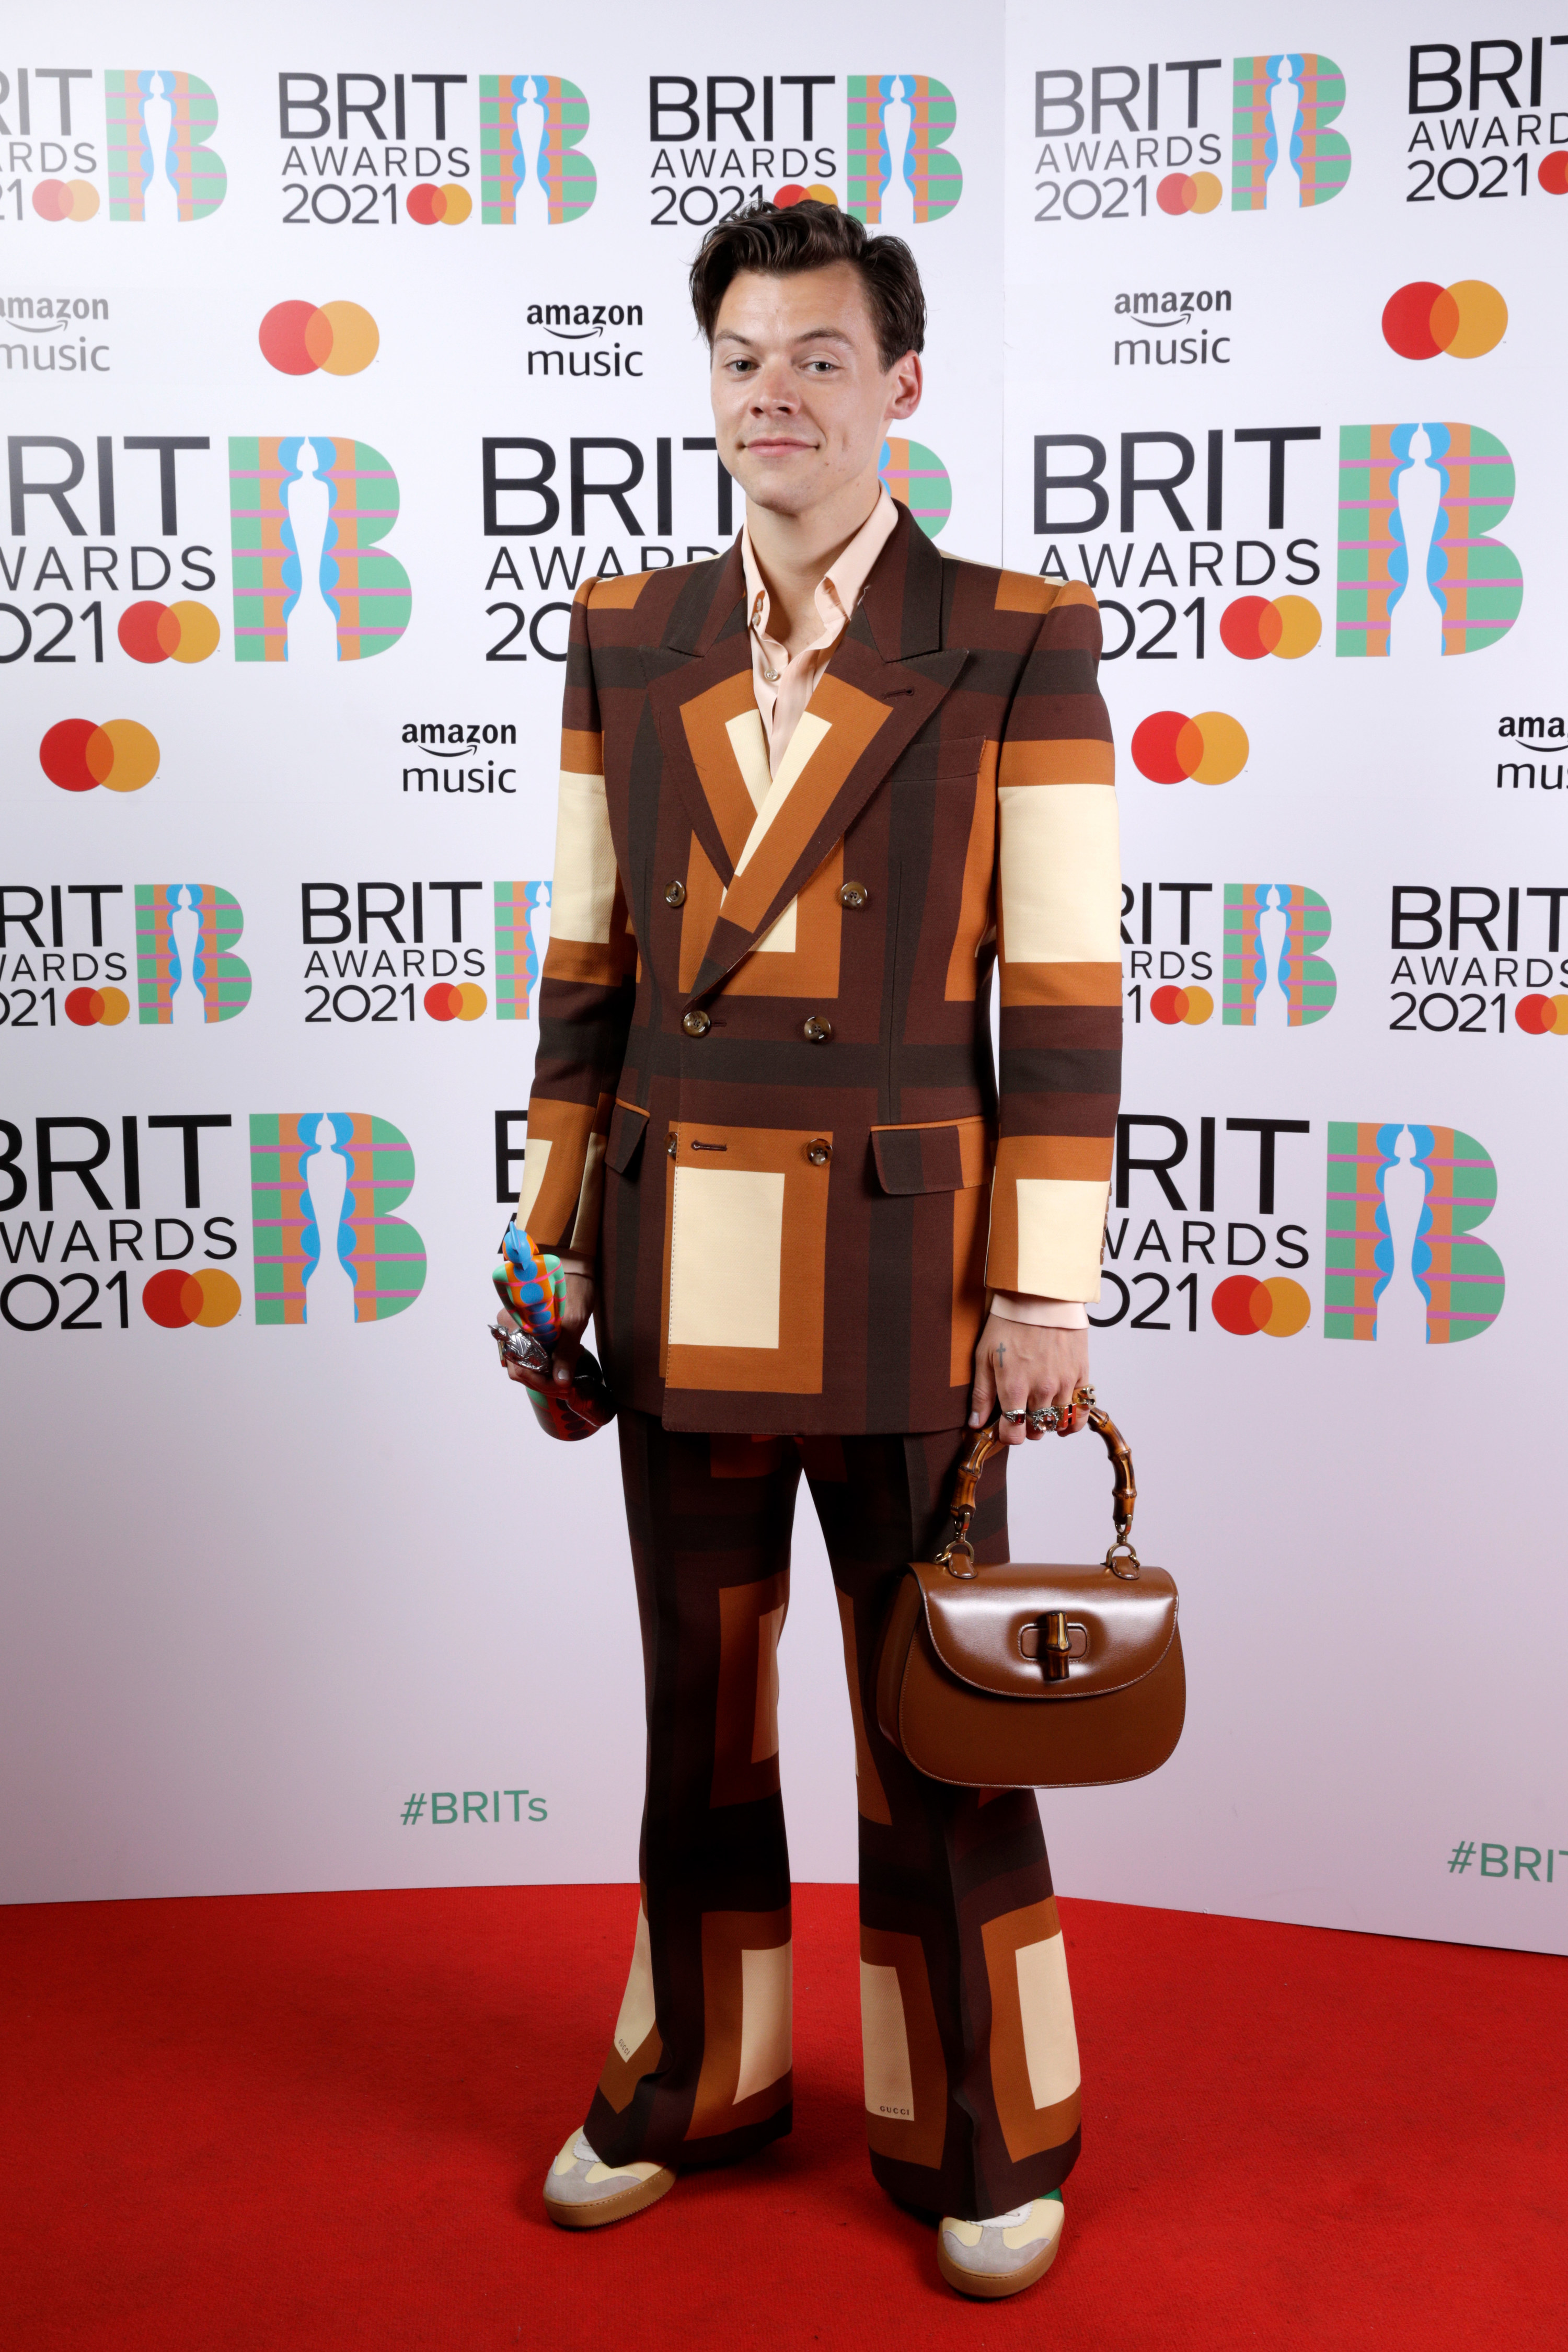 Harry Styles wins the Mastercard British Single award for Watermelon Sugar during The BRIT Awards 2021 at The O2 Arena on May 11, 2021 in London, England